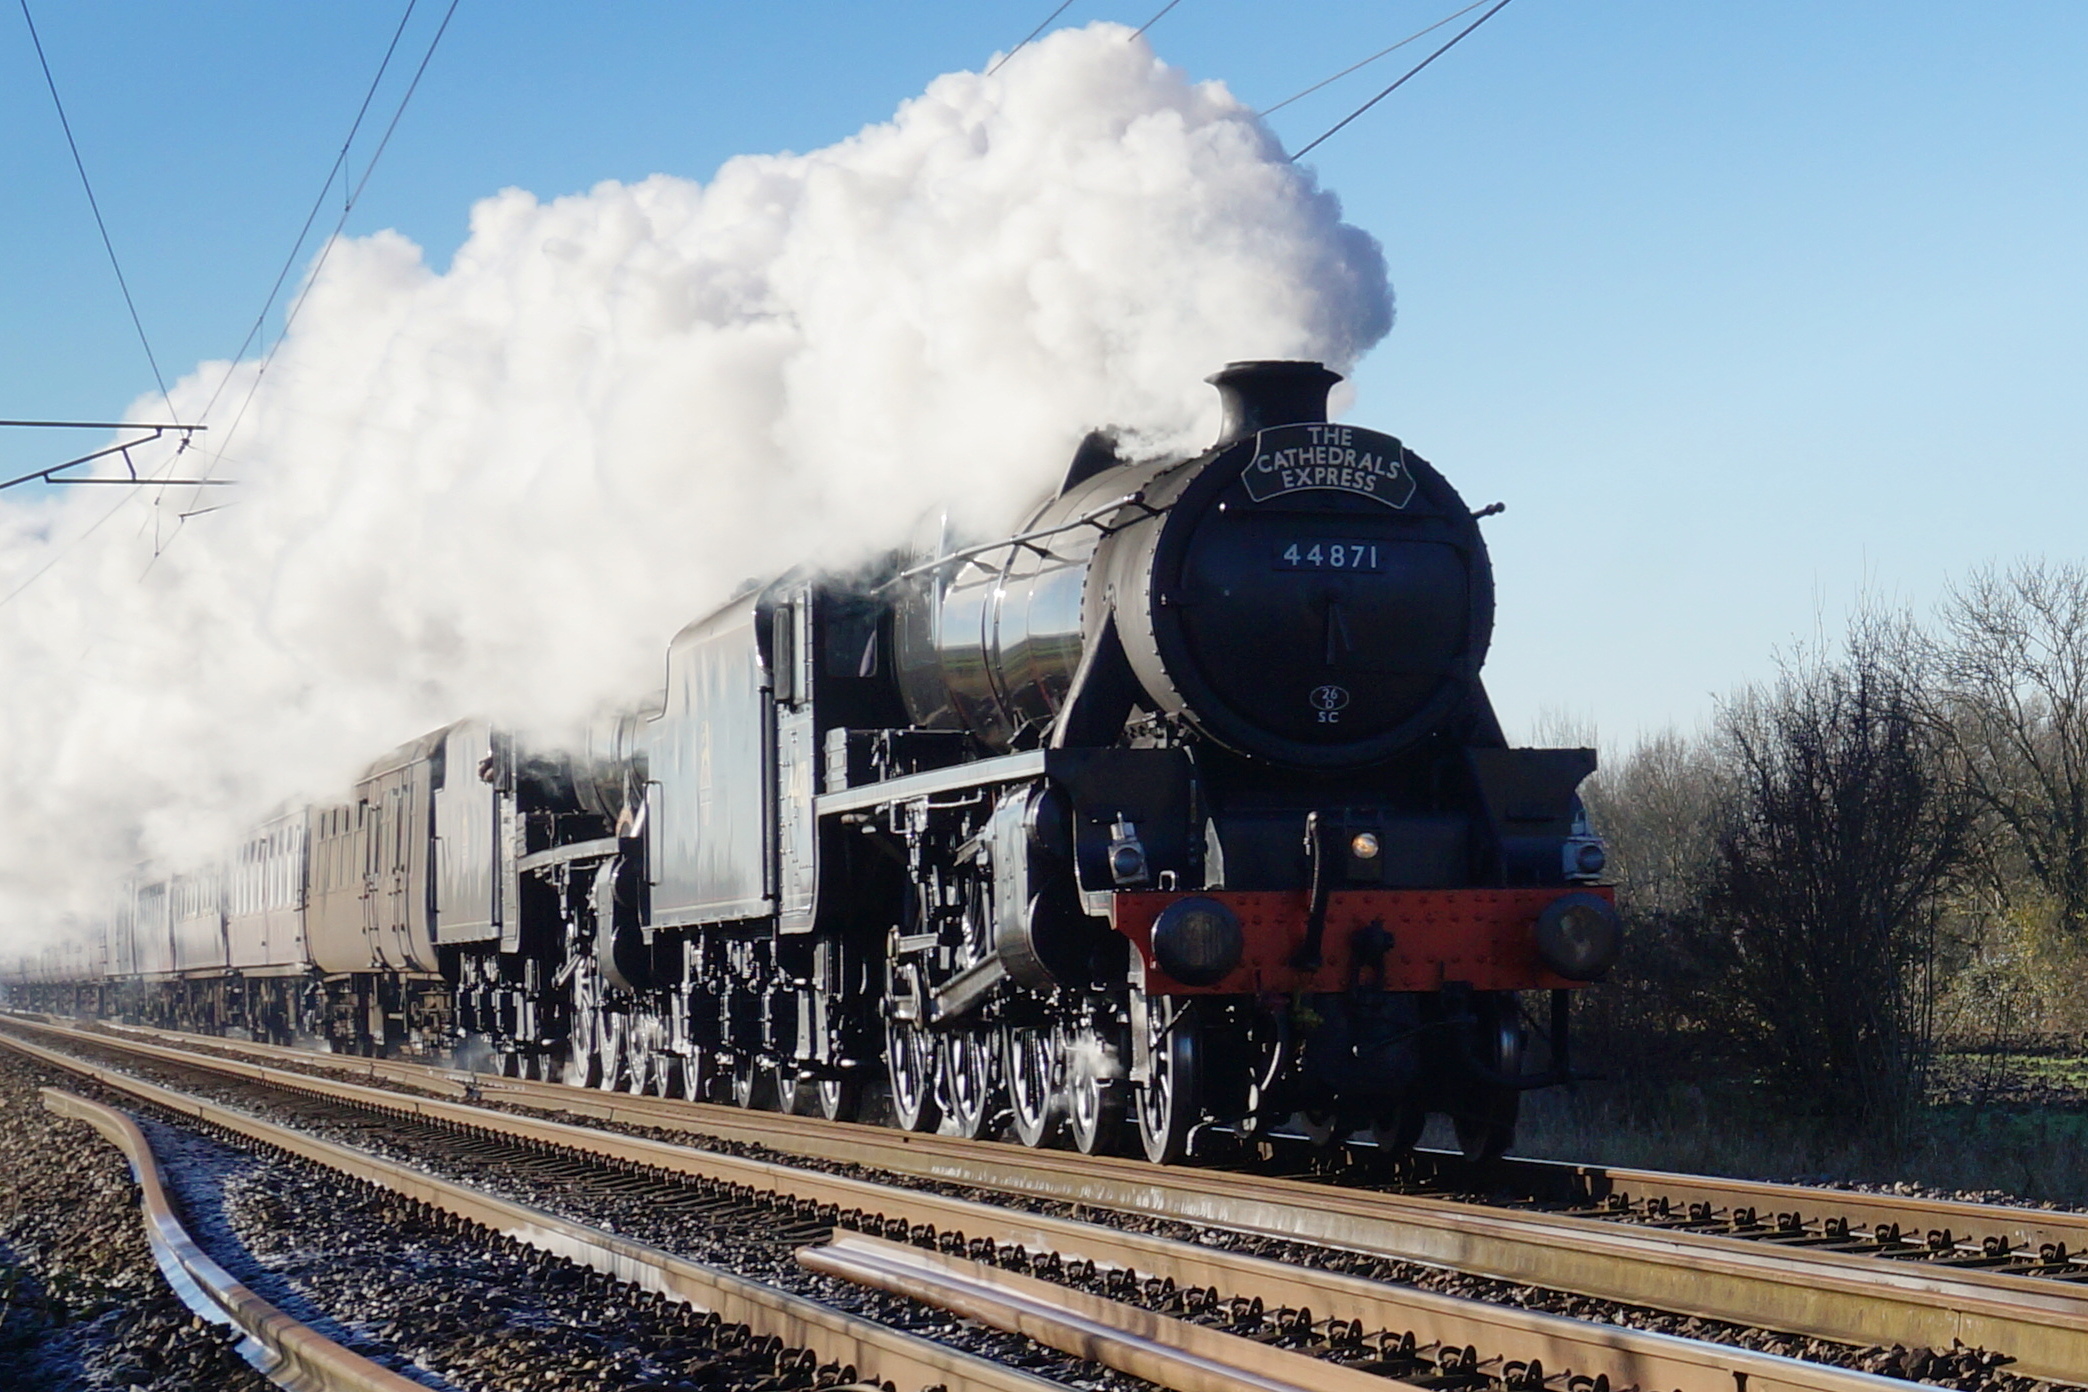 Cathedrals Express Passes Milton